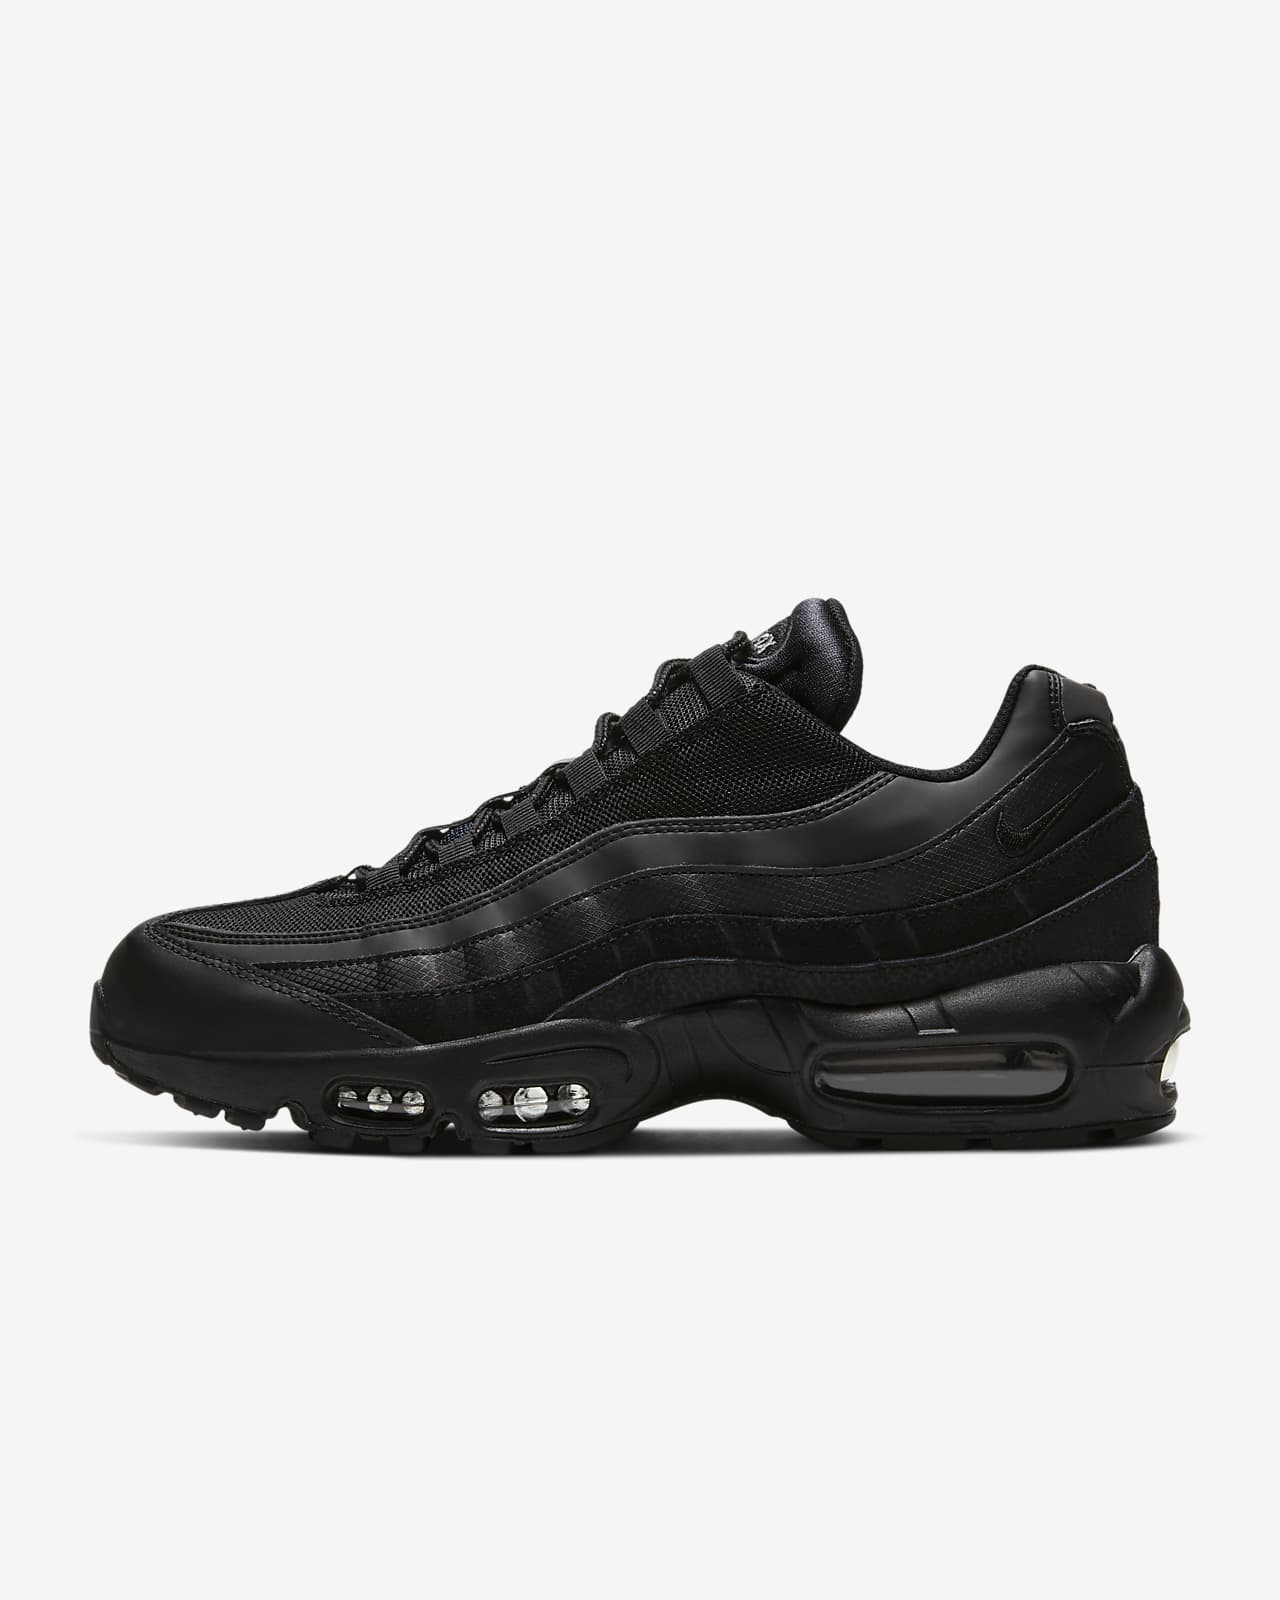 Nike Air Max 95 Essential Men's Shoes زخرفة حرف